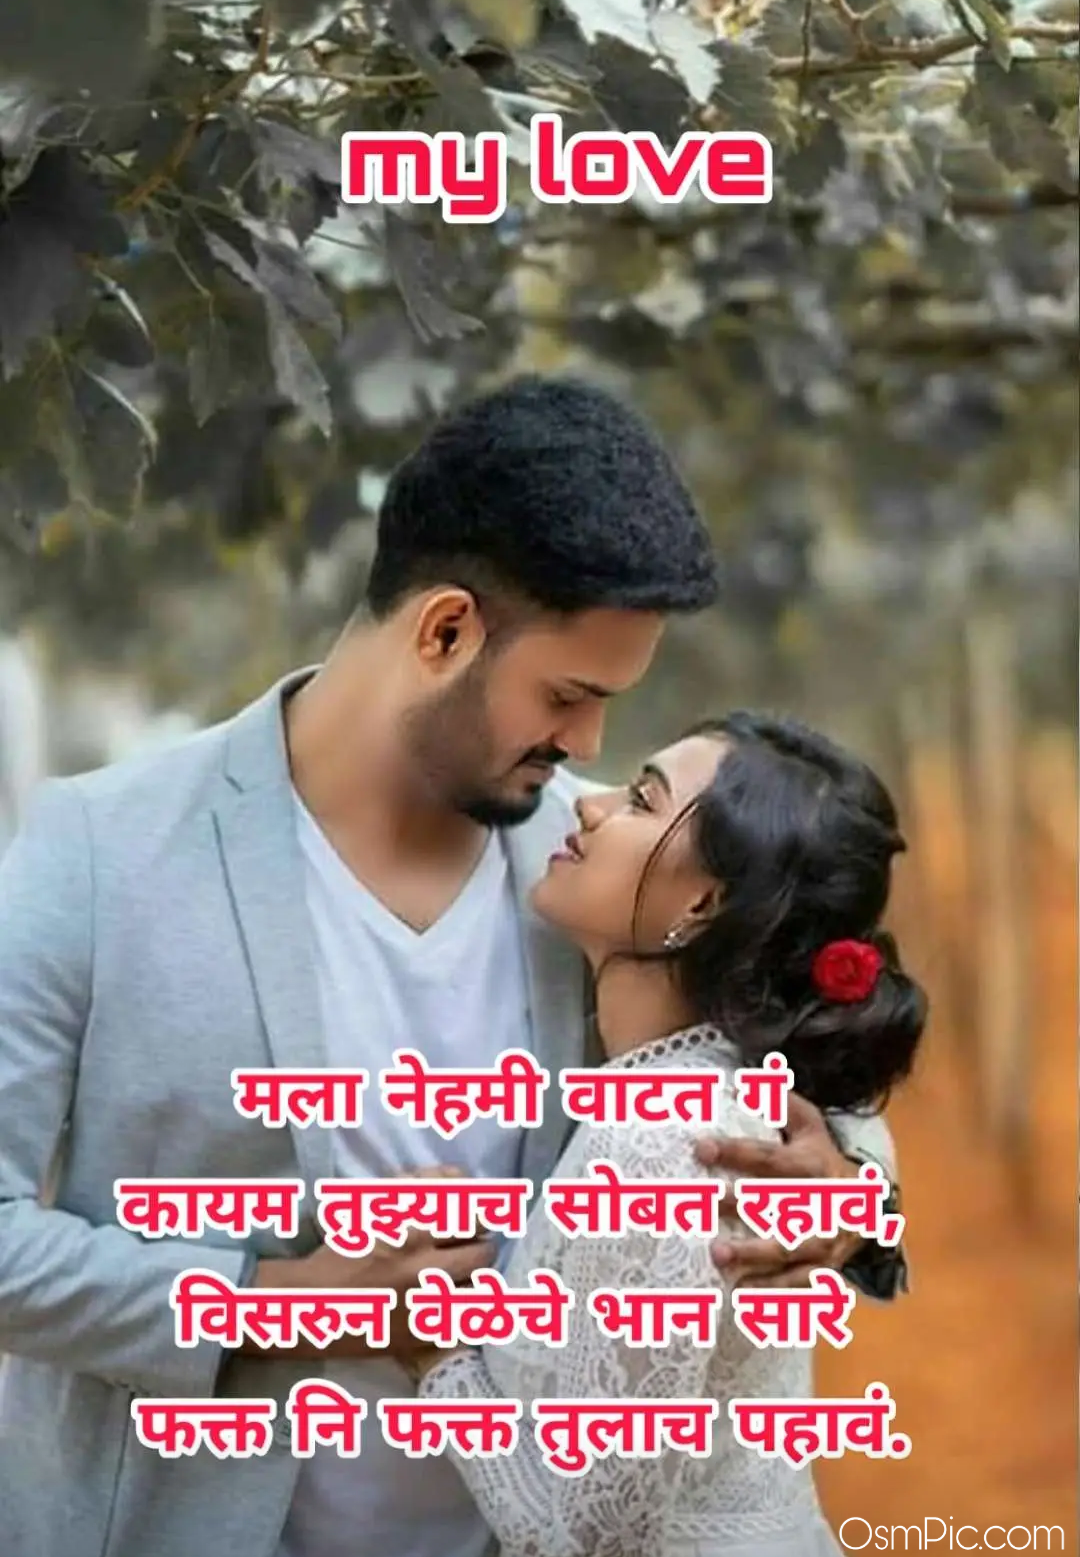 New Love Status Marathi Images Quotes Pics For Husband Wife & Love